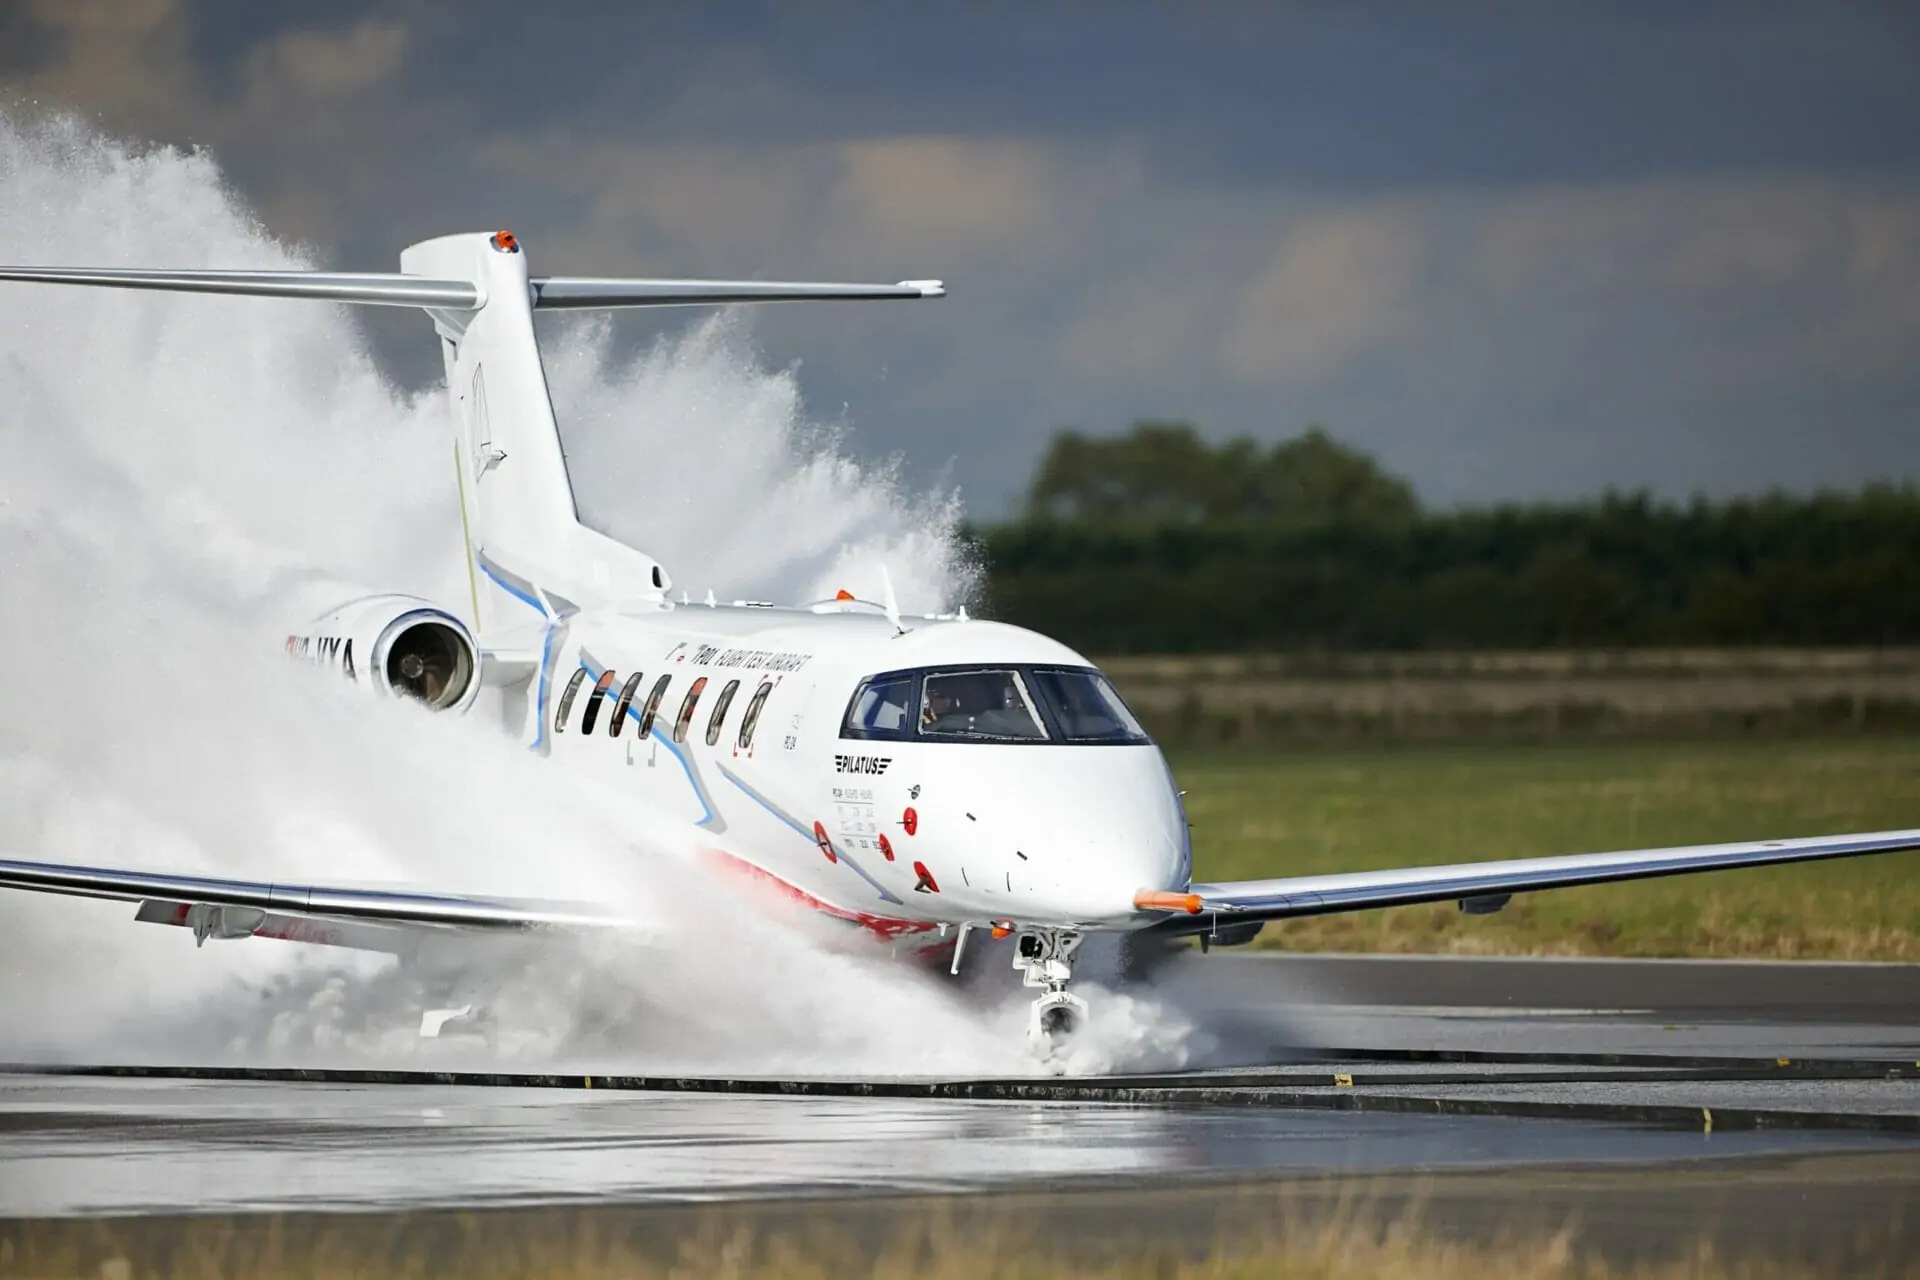 How Safe Are Private Jets? Are Private Jets Safer than Commercial Airlines?